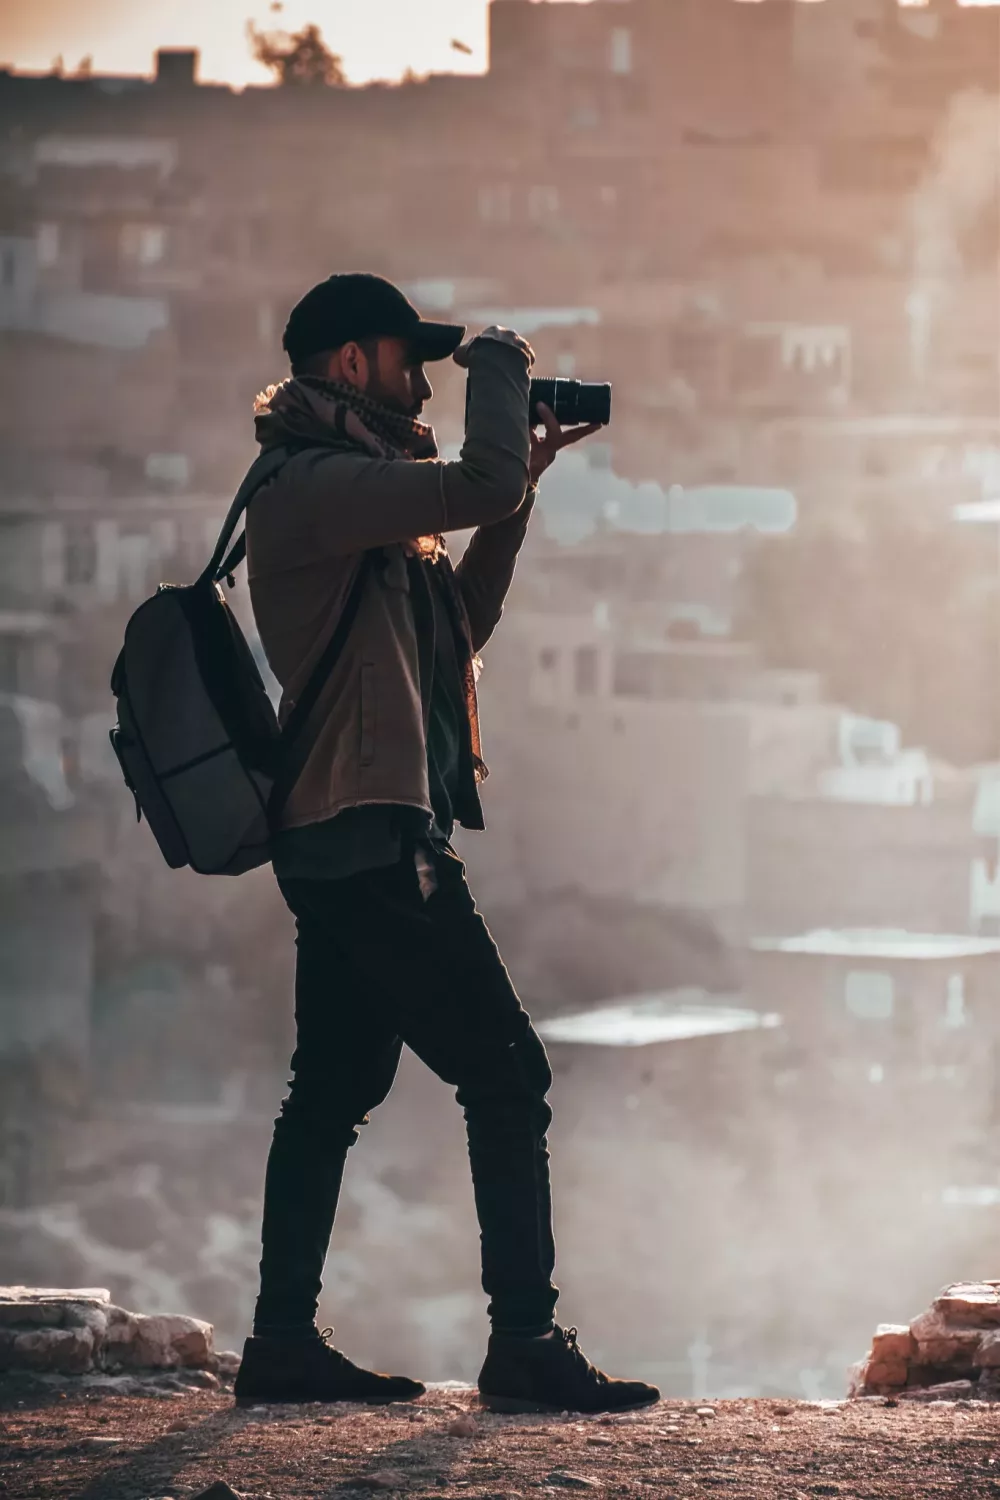 man taking a photo with a professional camera